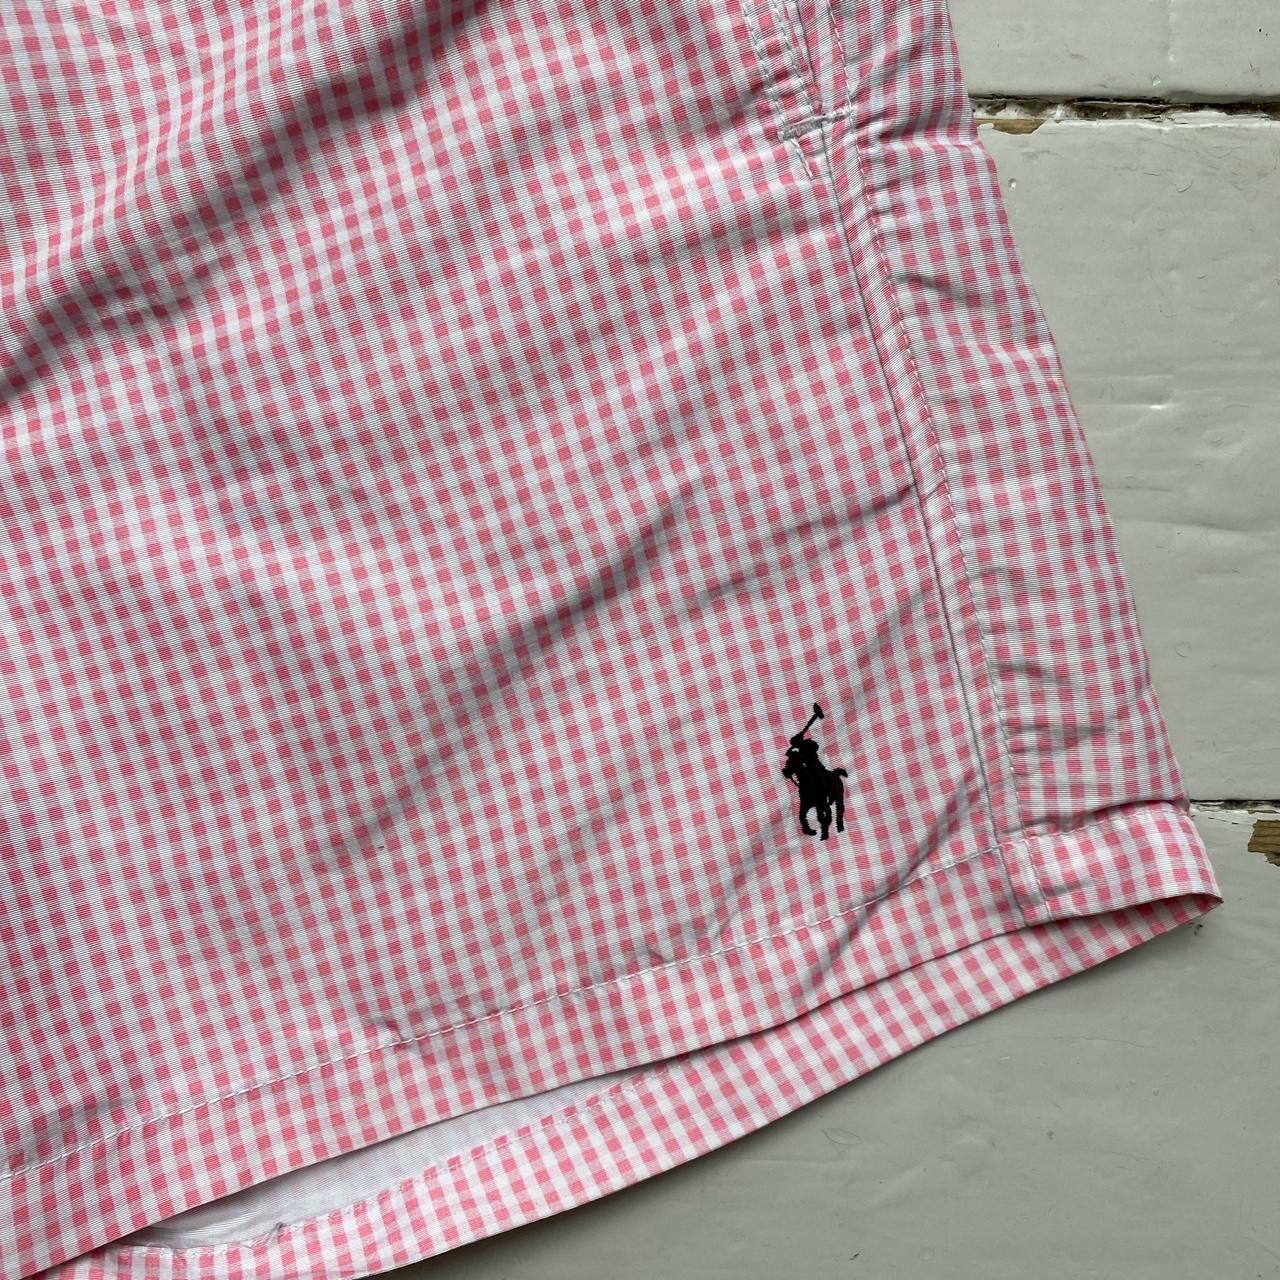 Ralph Lauren Polo Checked Pink and White Swim Shorts